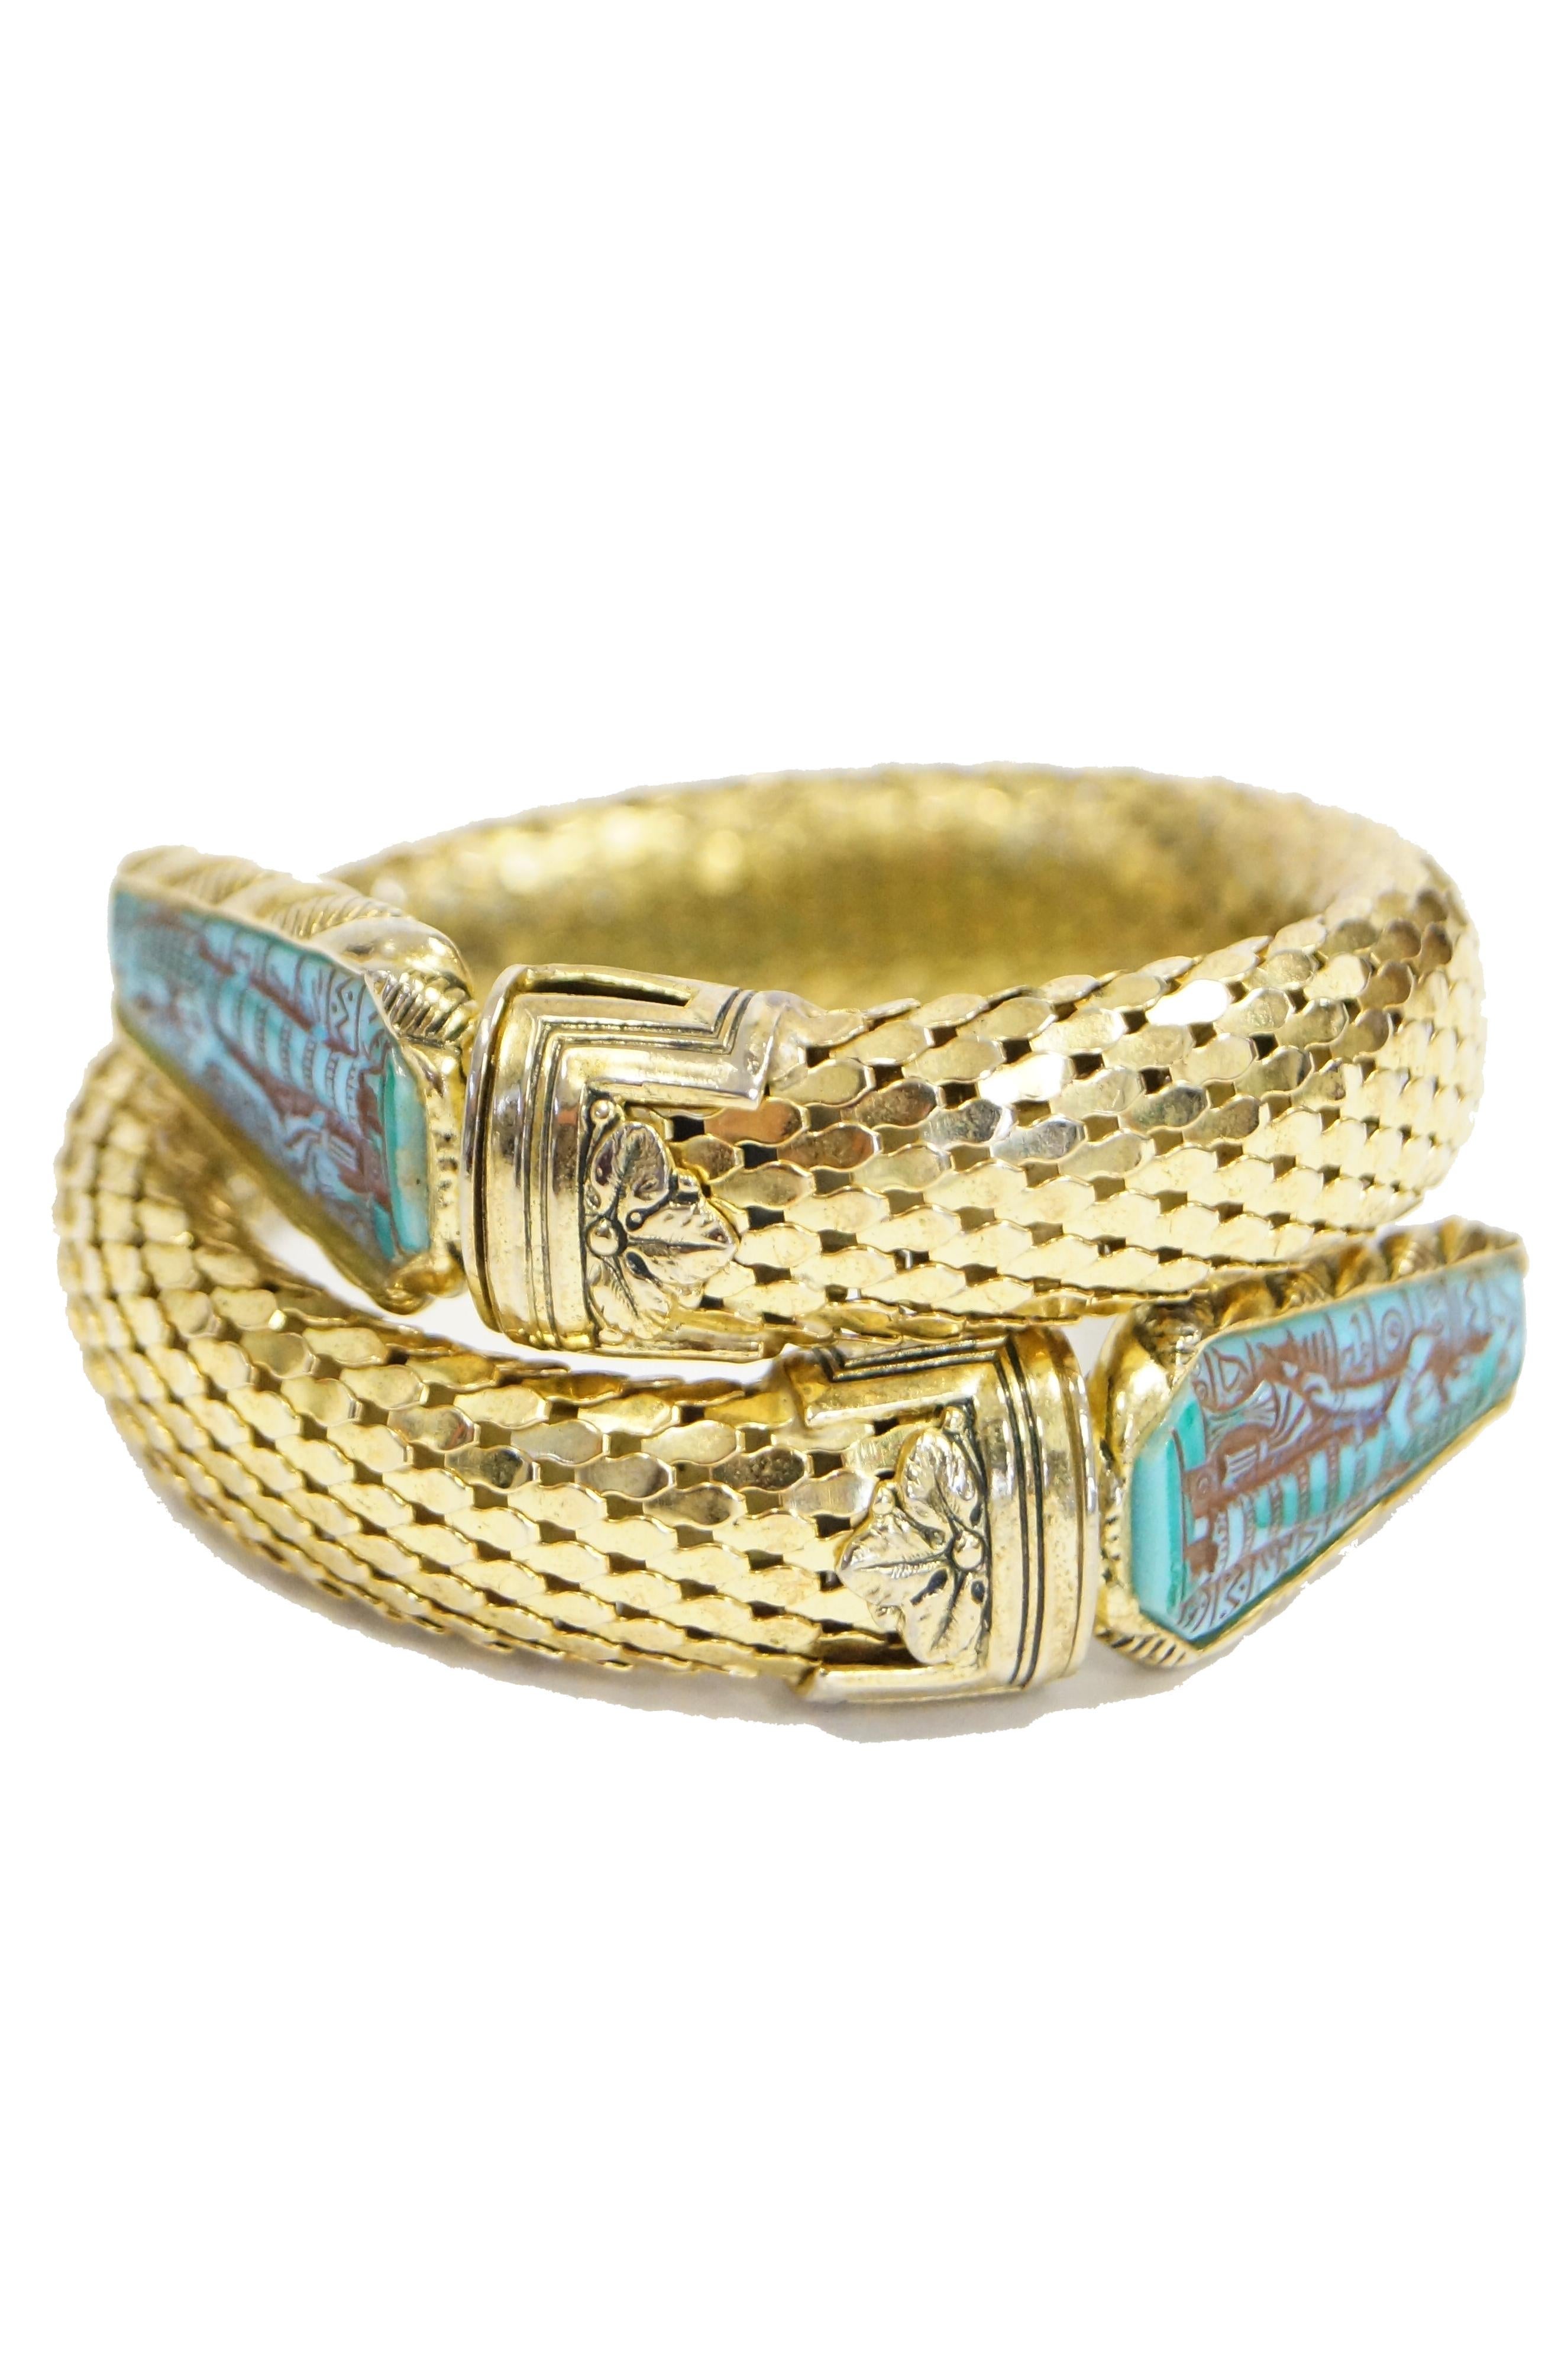 Striking Egyptian revival bracelet and earrings set by Whiting & Davis. The bracelet features the classic Whiting & Davis chainmail coil - present in many of their designs, most famously their snake coil bracelets- tipped with blue faux turquoise